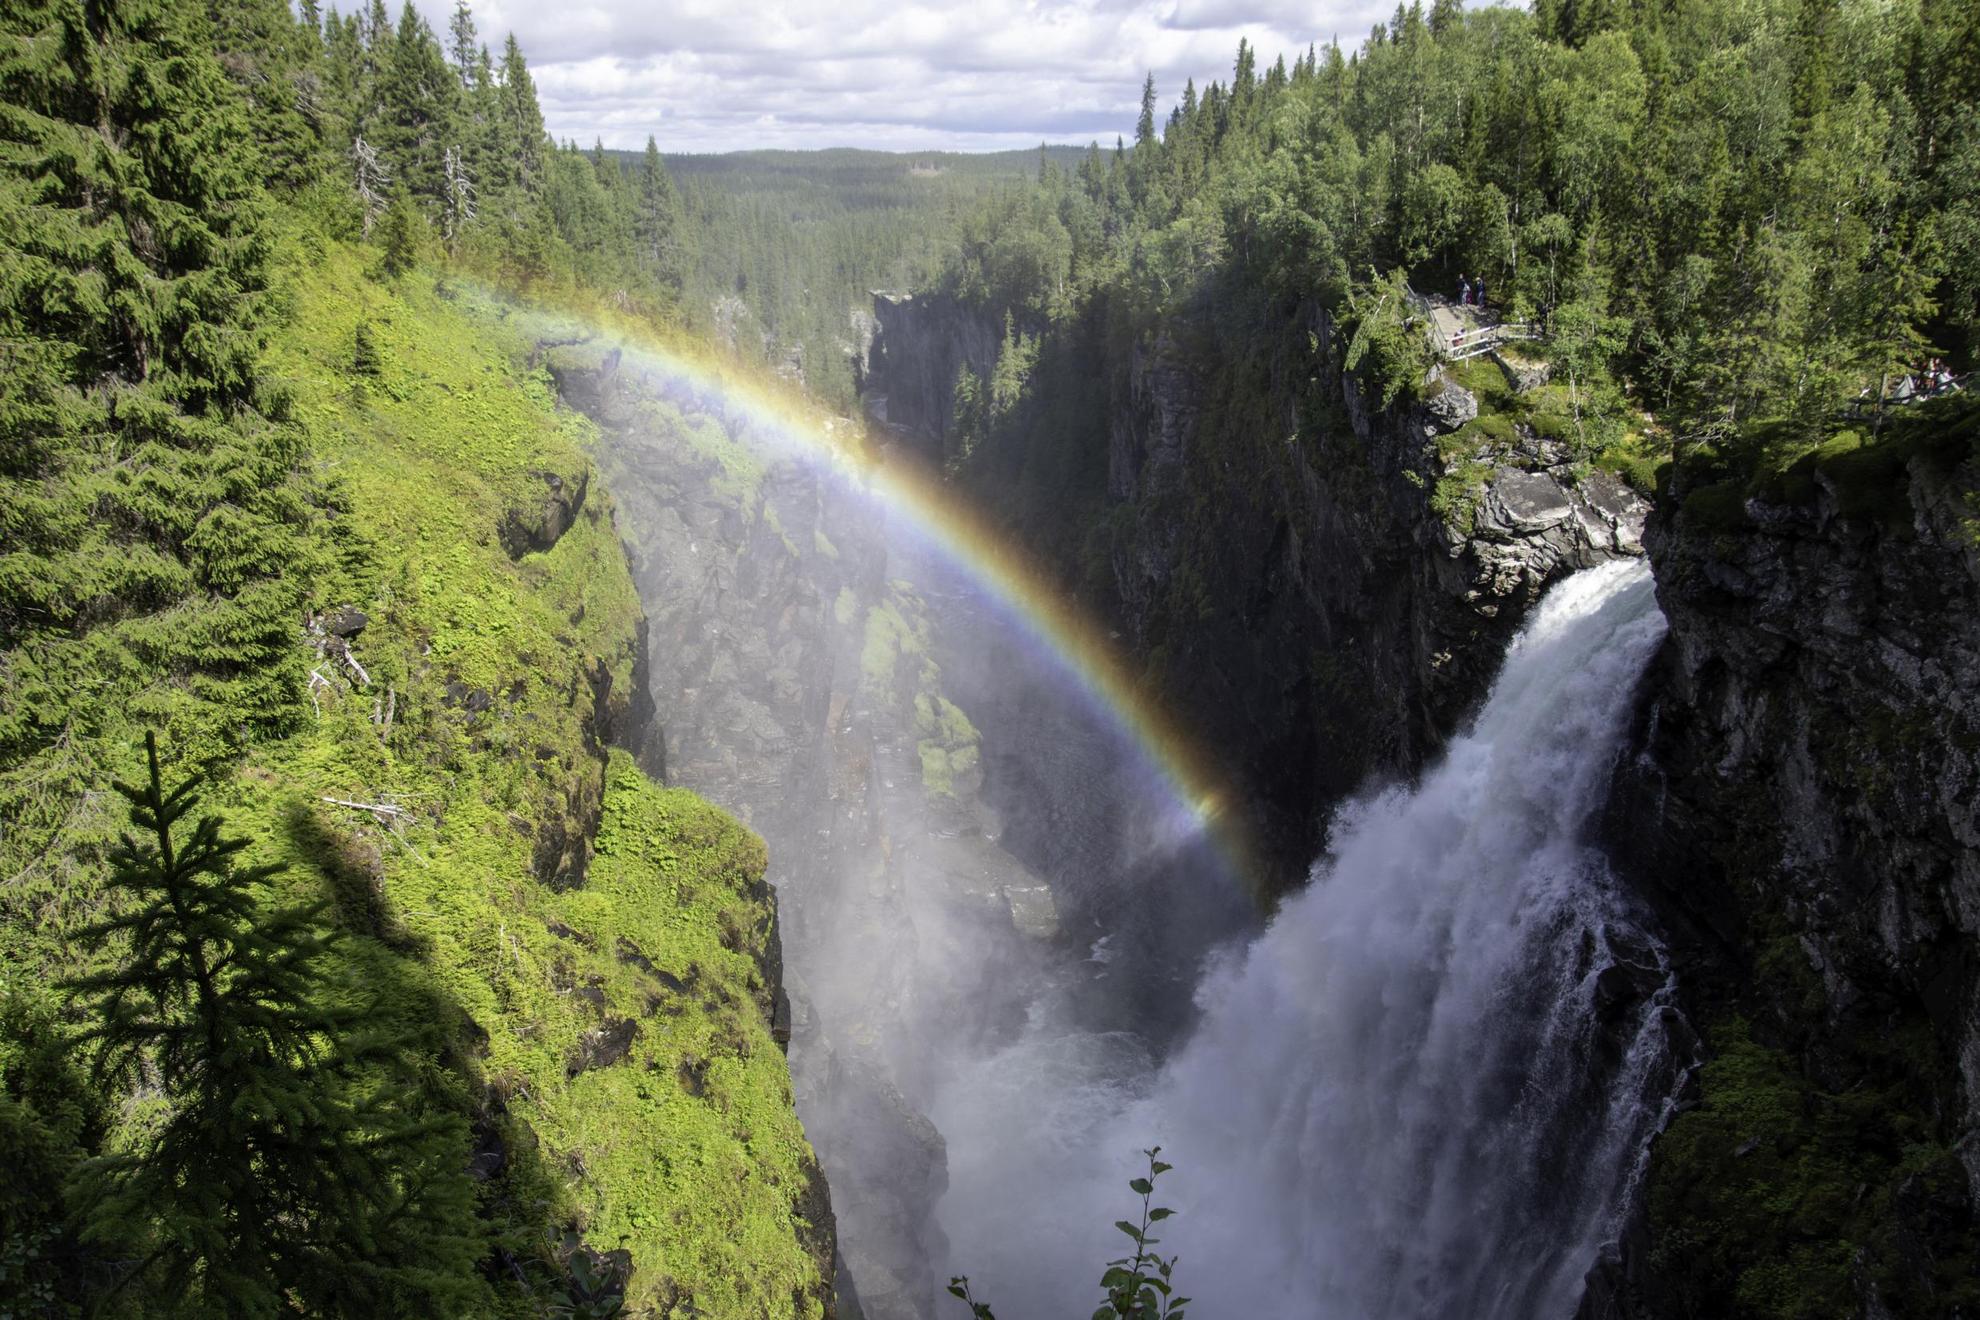 A waterfall rushes down a cliff in the forest. A rainbow is visible in the water vapour from the fall.